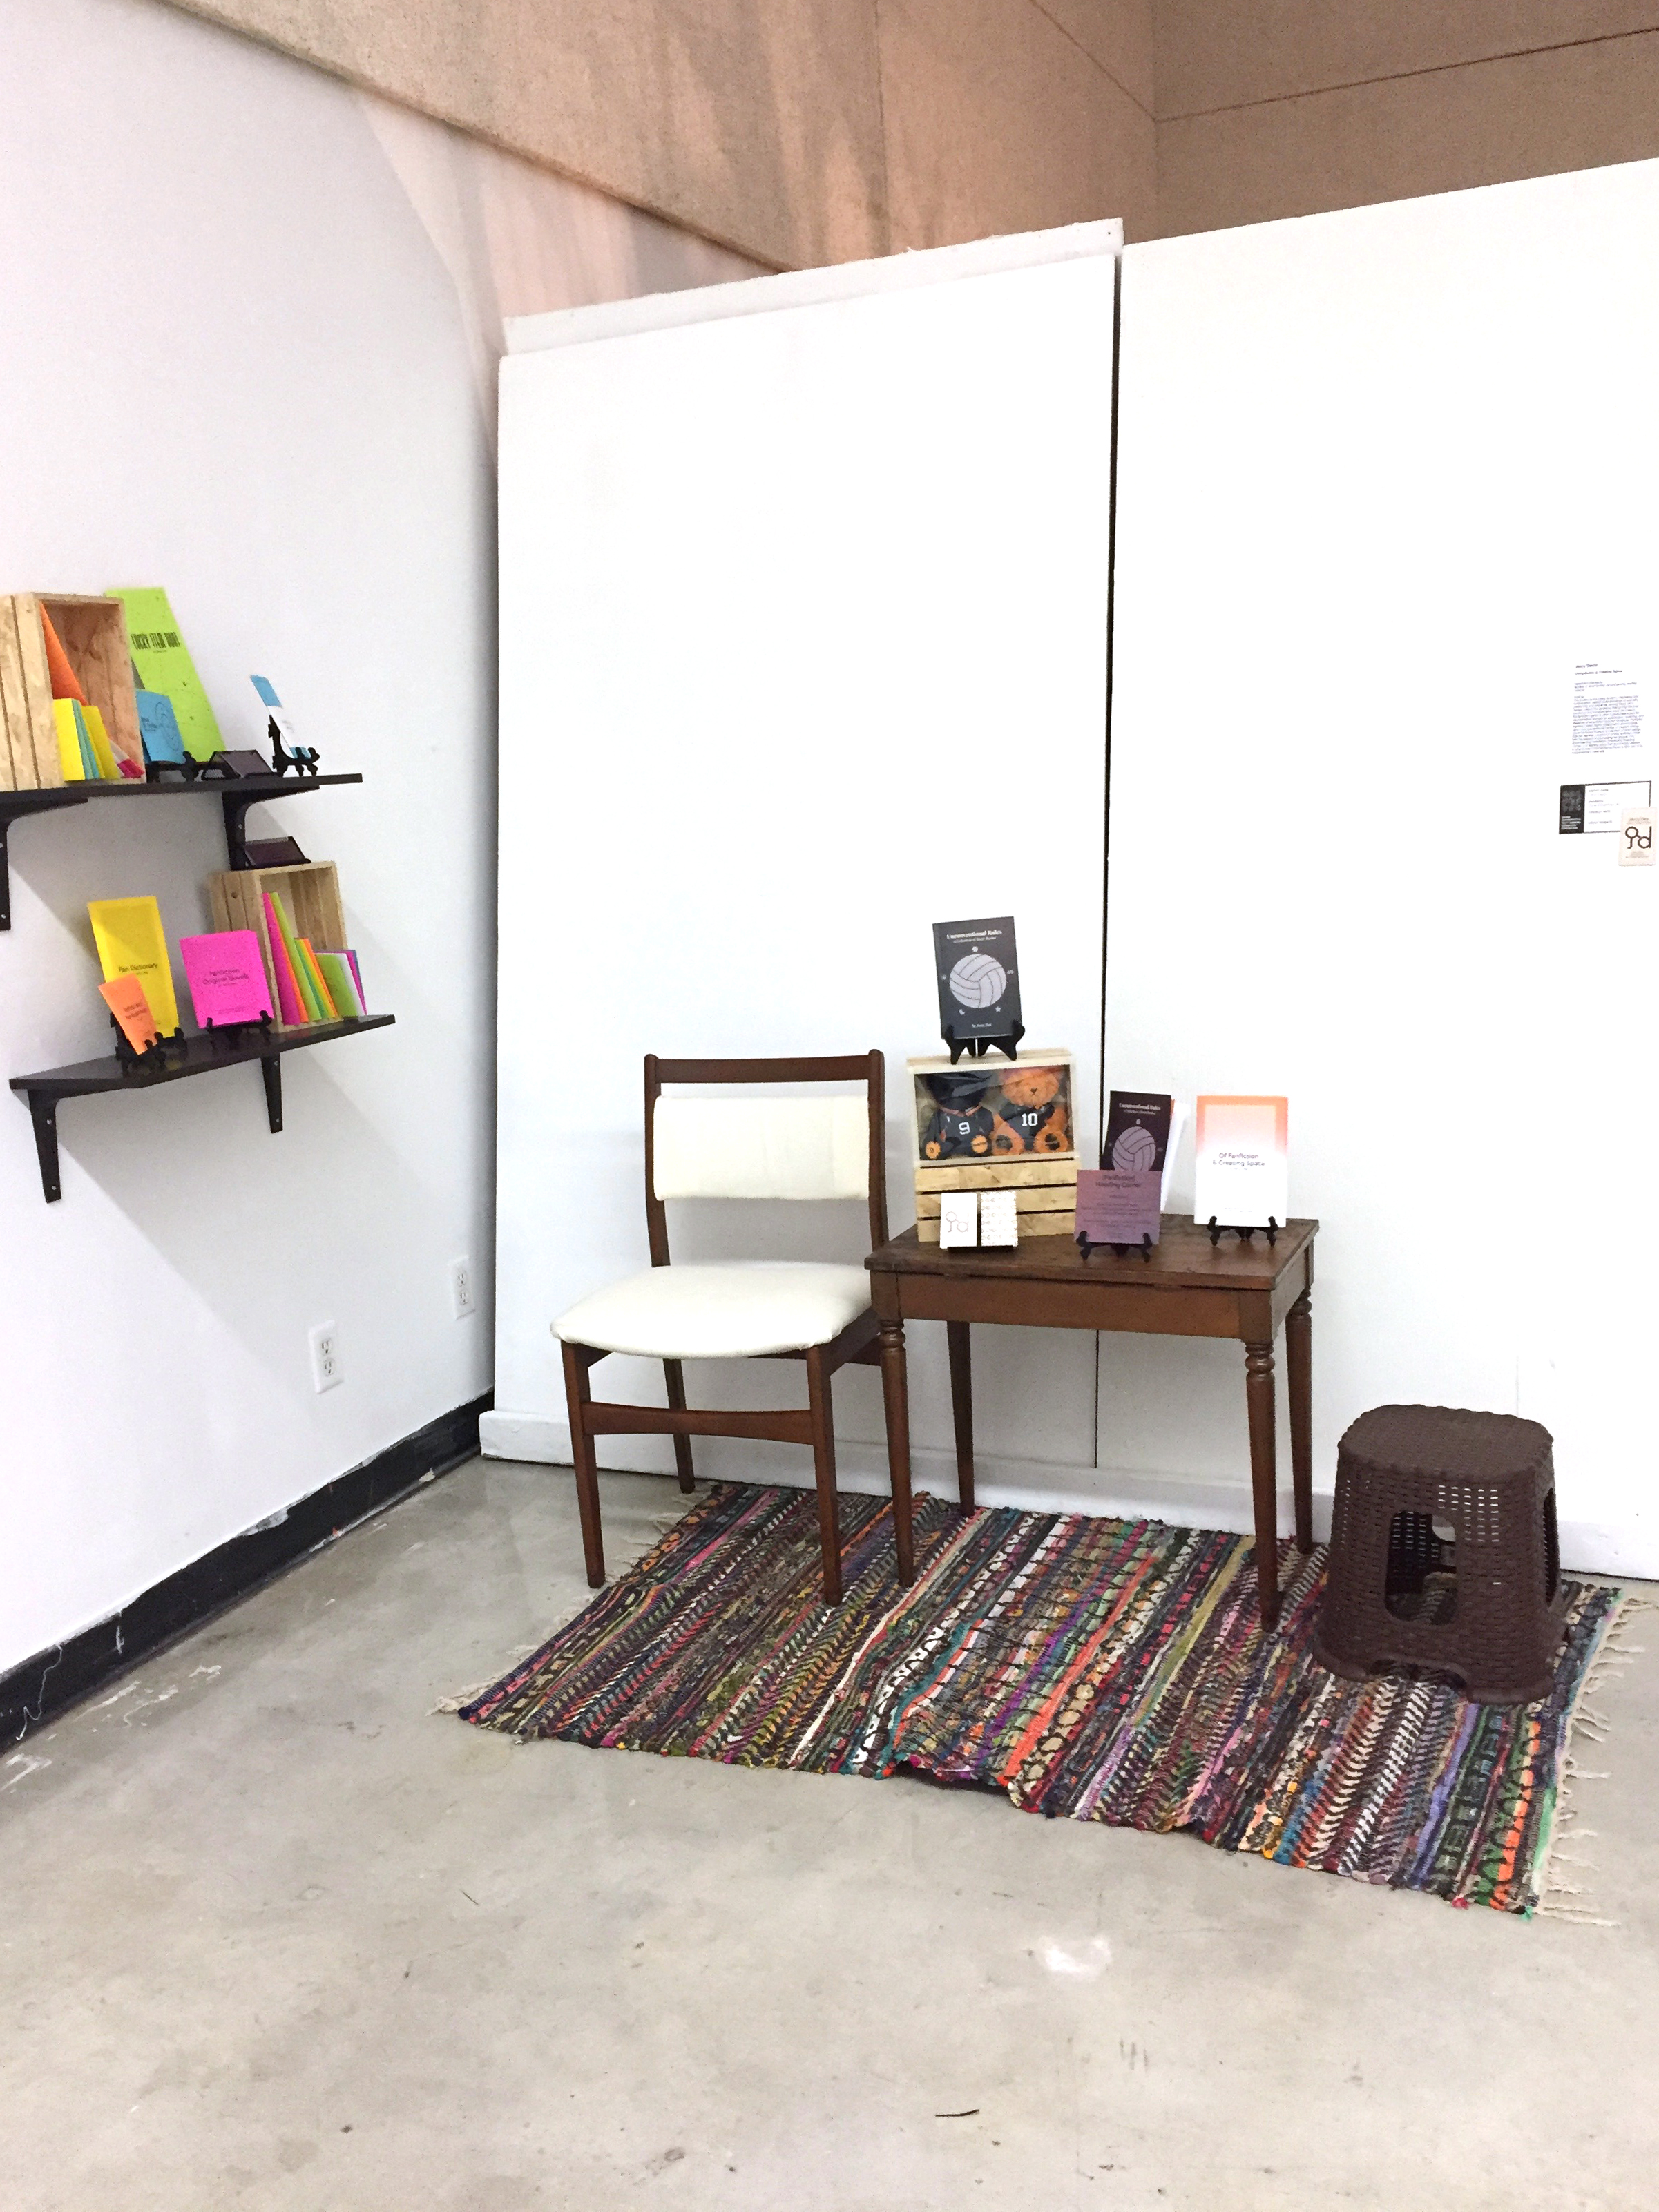 A wide shot capturing the entire Reading Corner. On the left are hanging shelves displaying chapbooks and zines. On the right is the reading space with a table and seats; the table displays several reading materials.